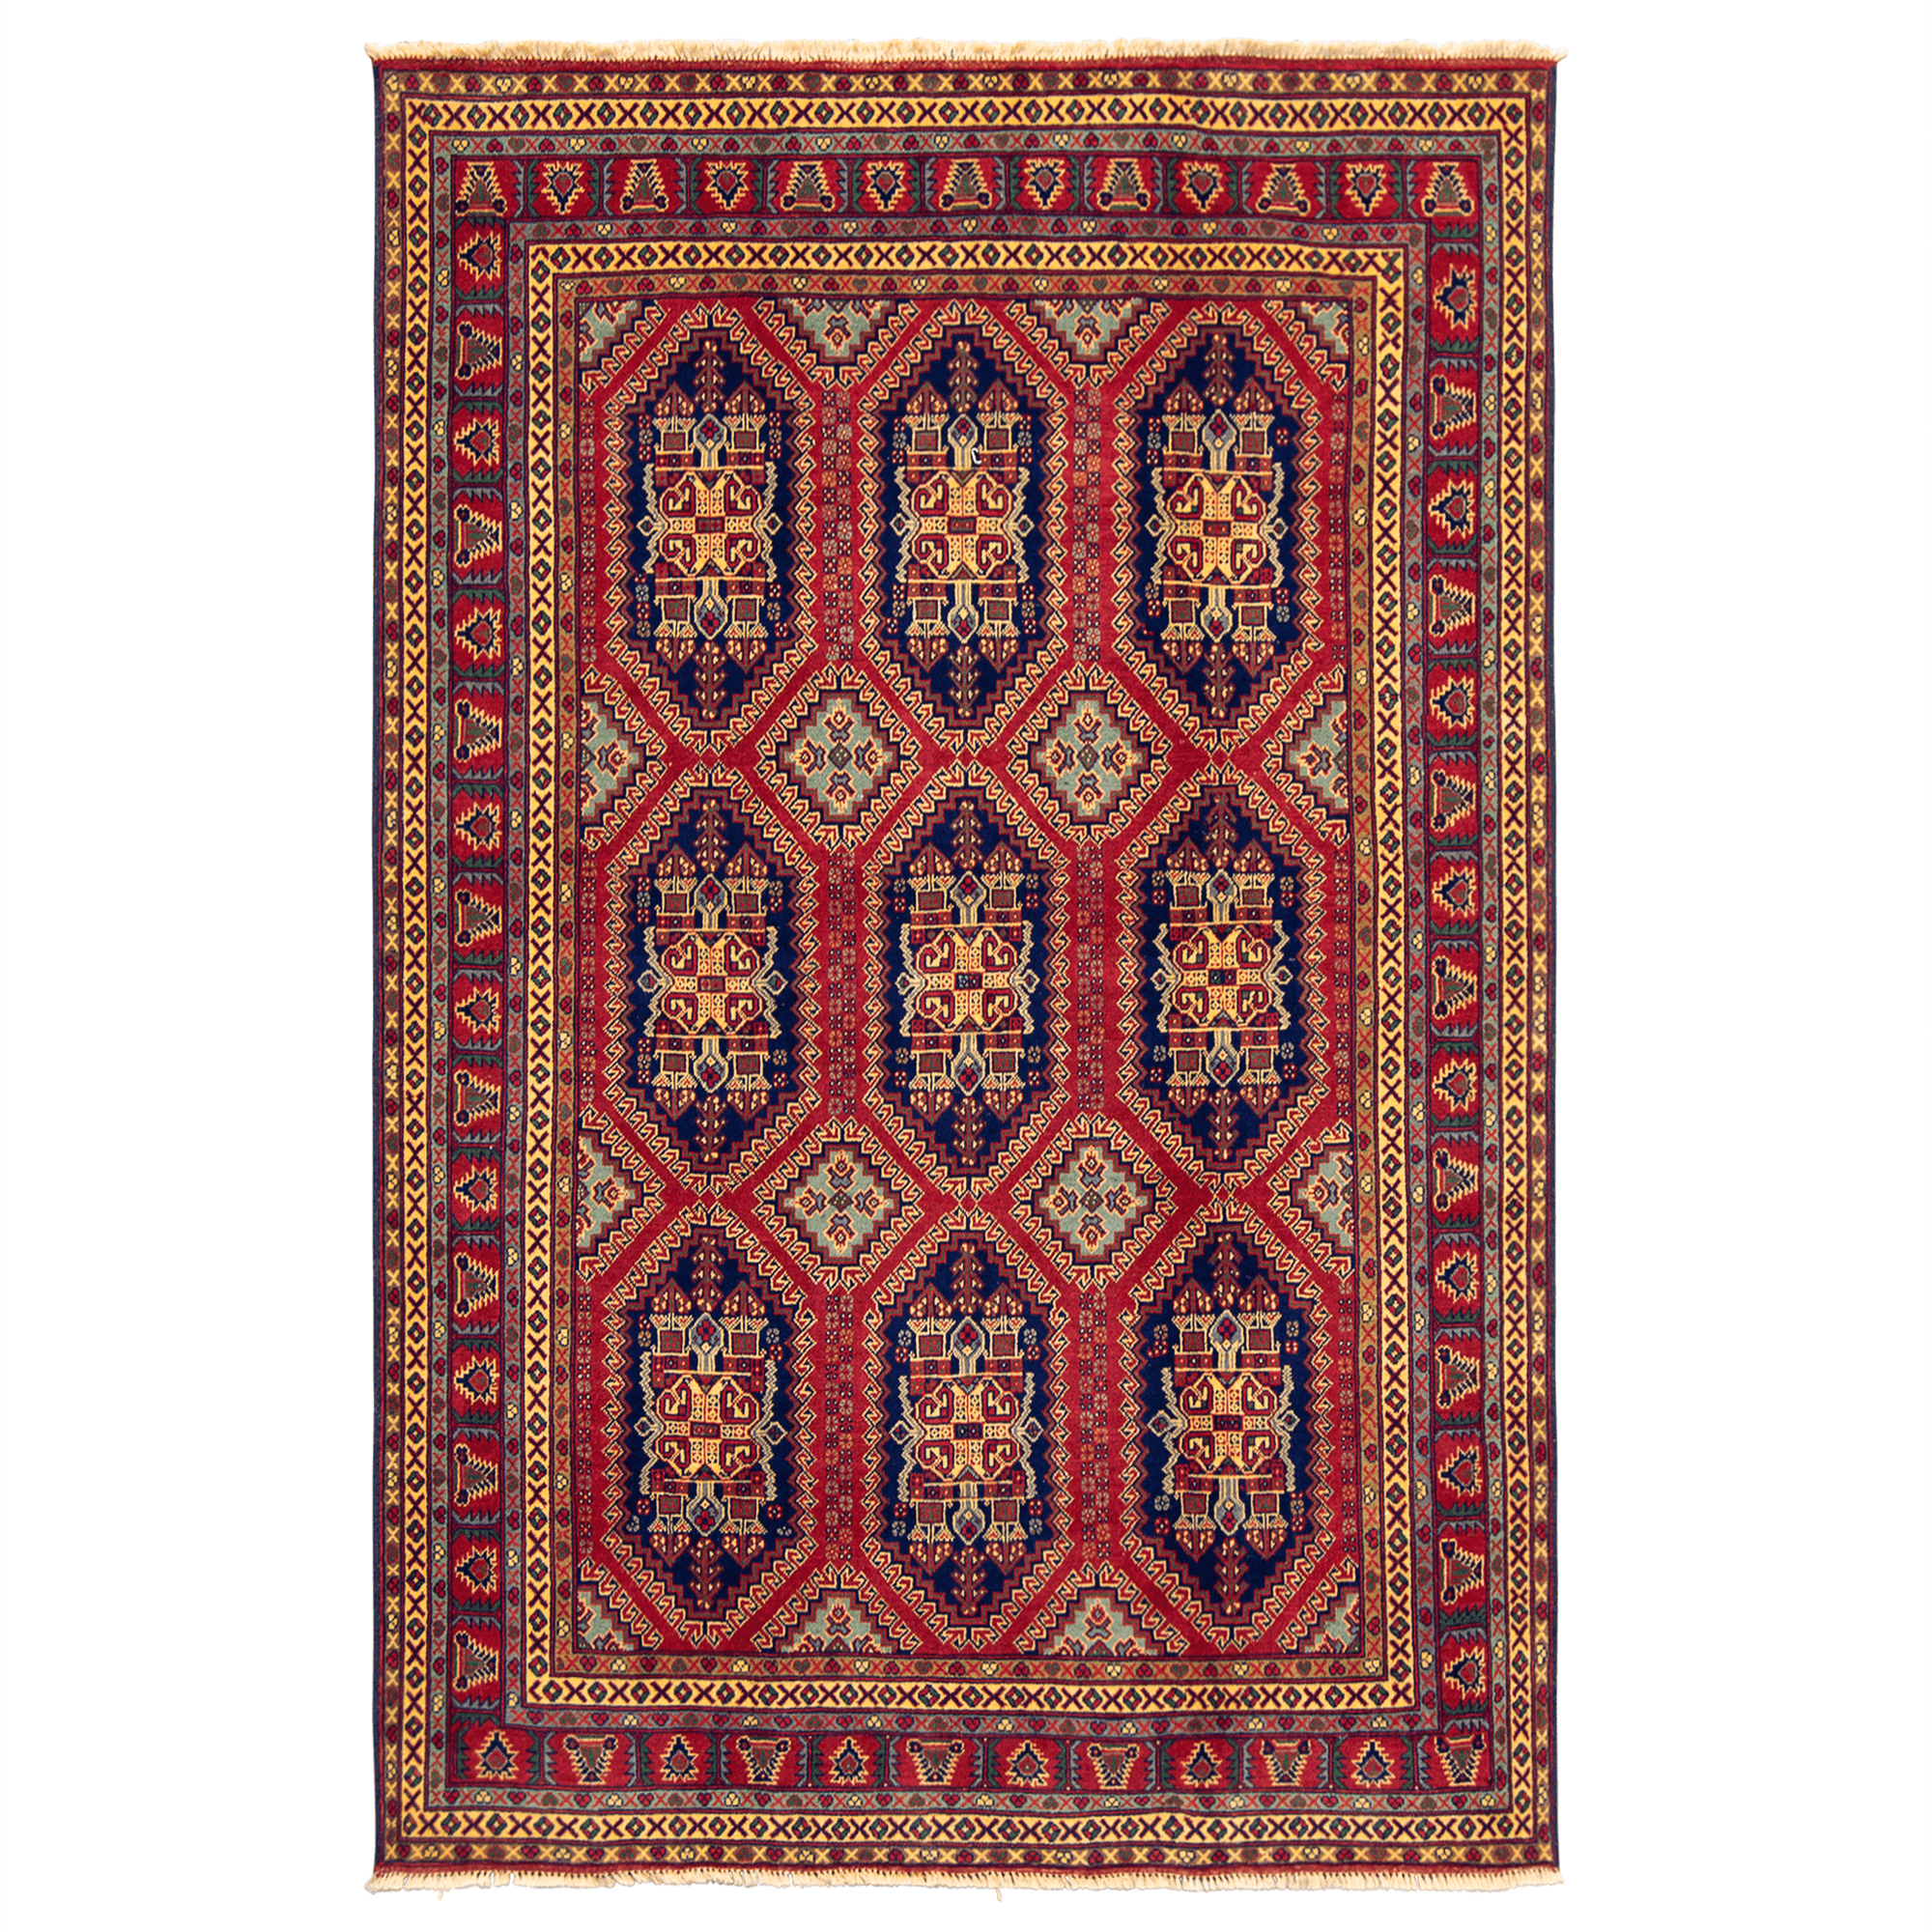 Super Fine Hand-knotted Tribal Wool Rug 150cm x 204cm